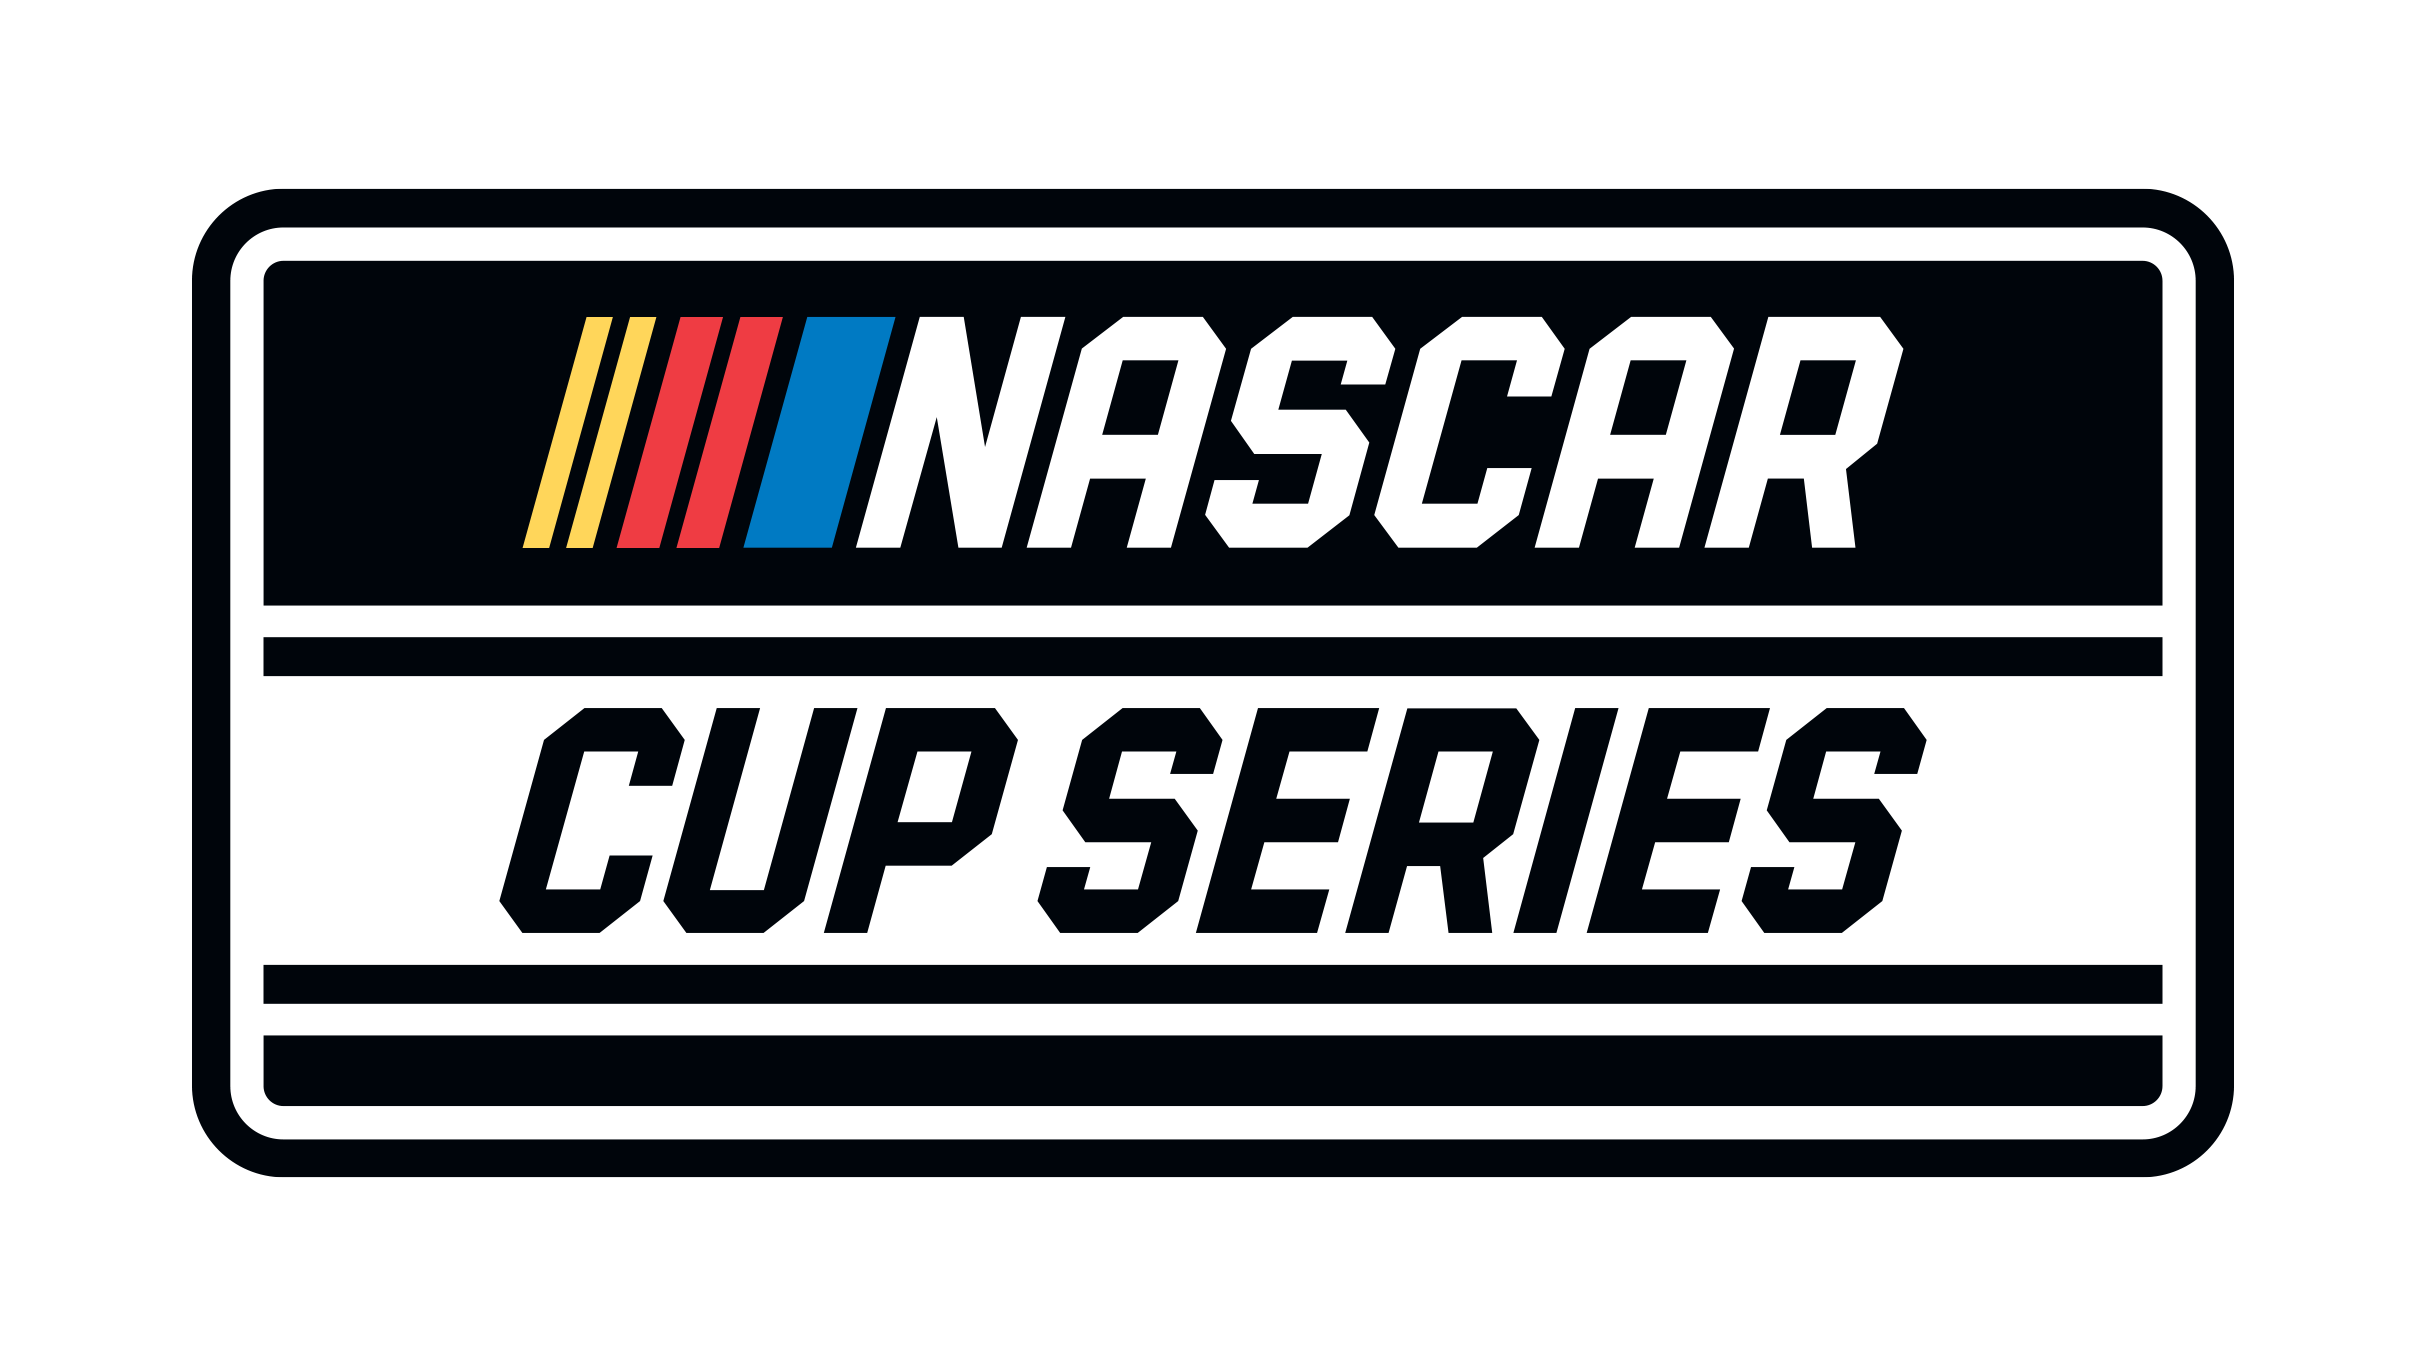 Coca-Cola 600 NASCAR Cup Series at Charlotte Motor Speedway